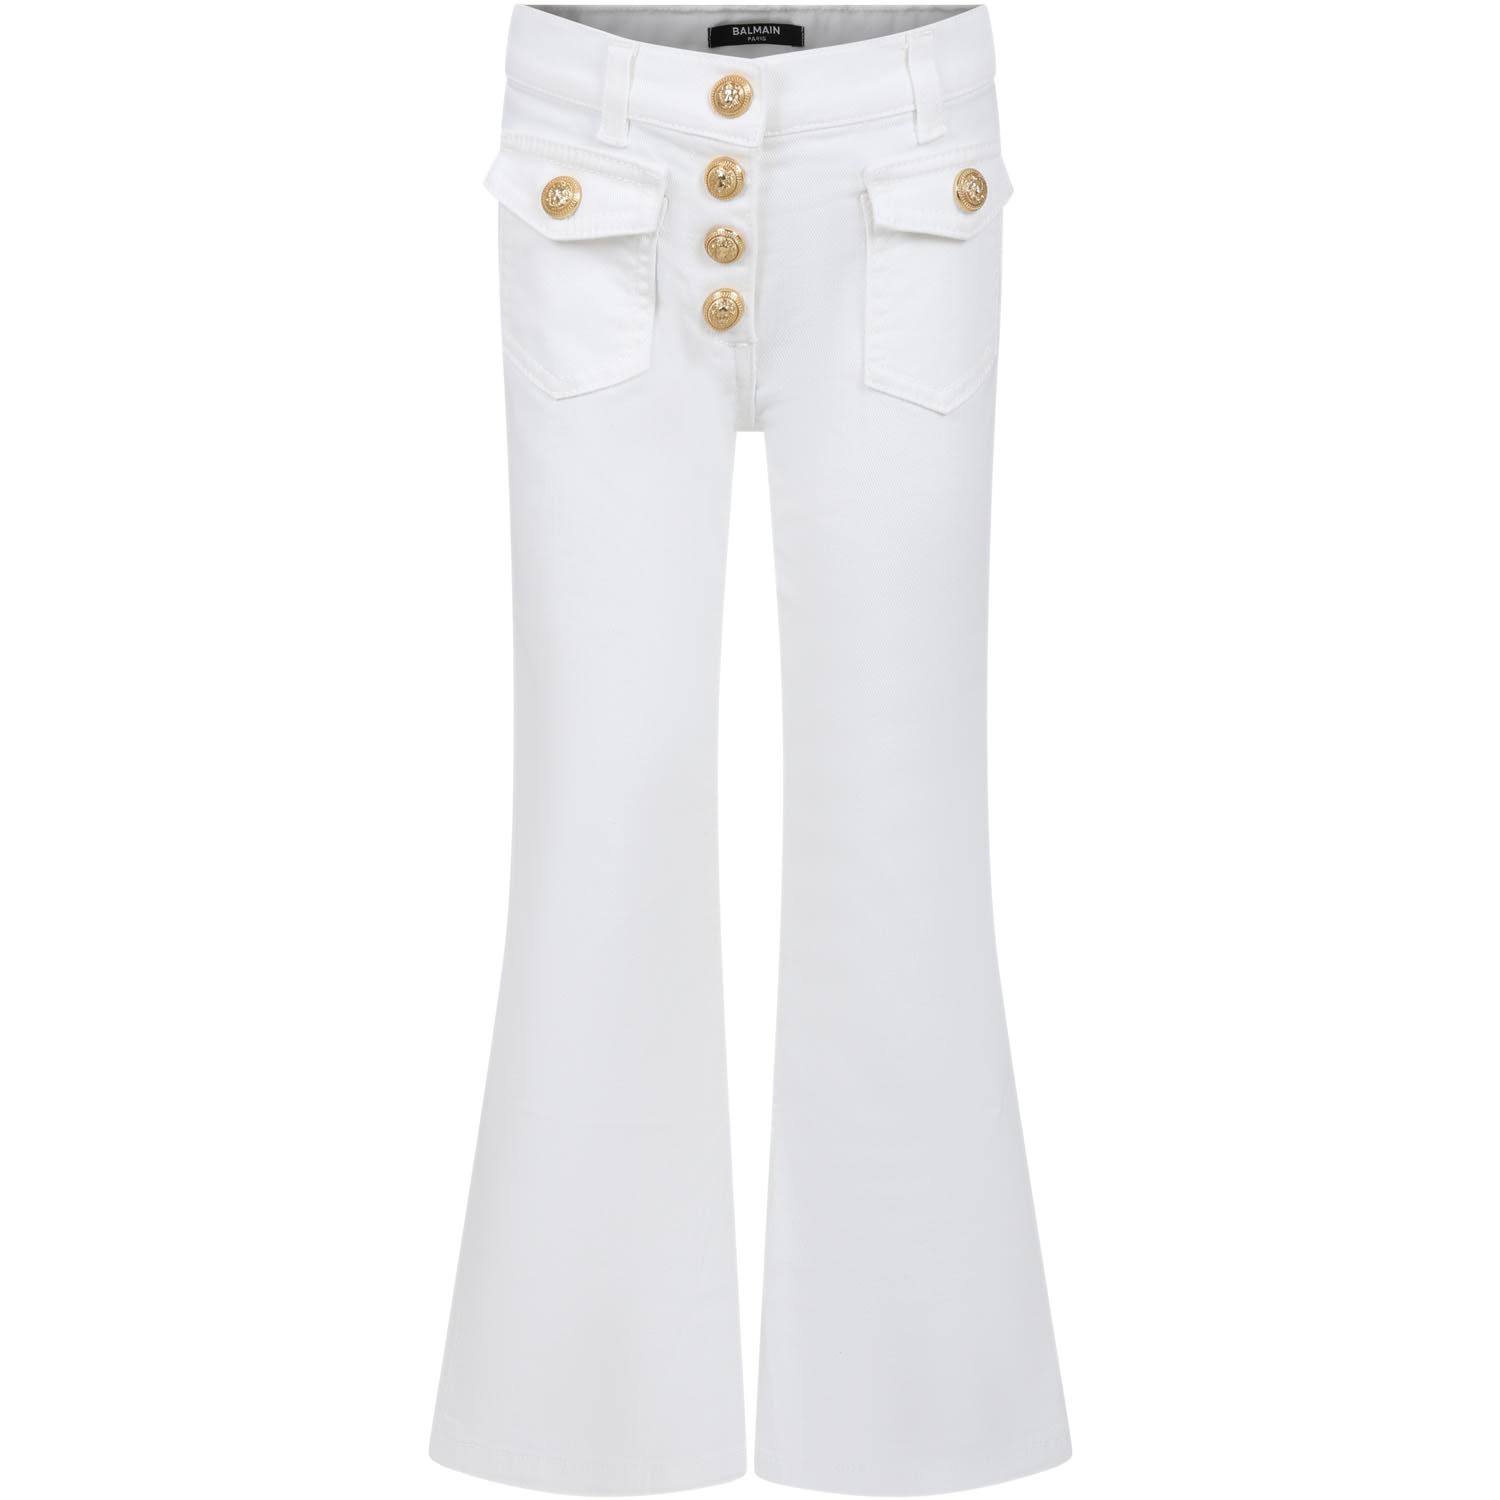 Balmain Kids' White Jeans For Girl With Gold Buttons In Bianco/oro